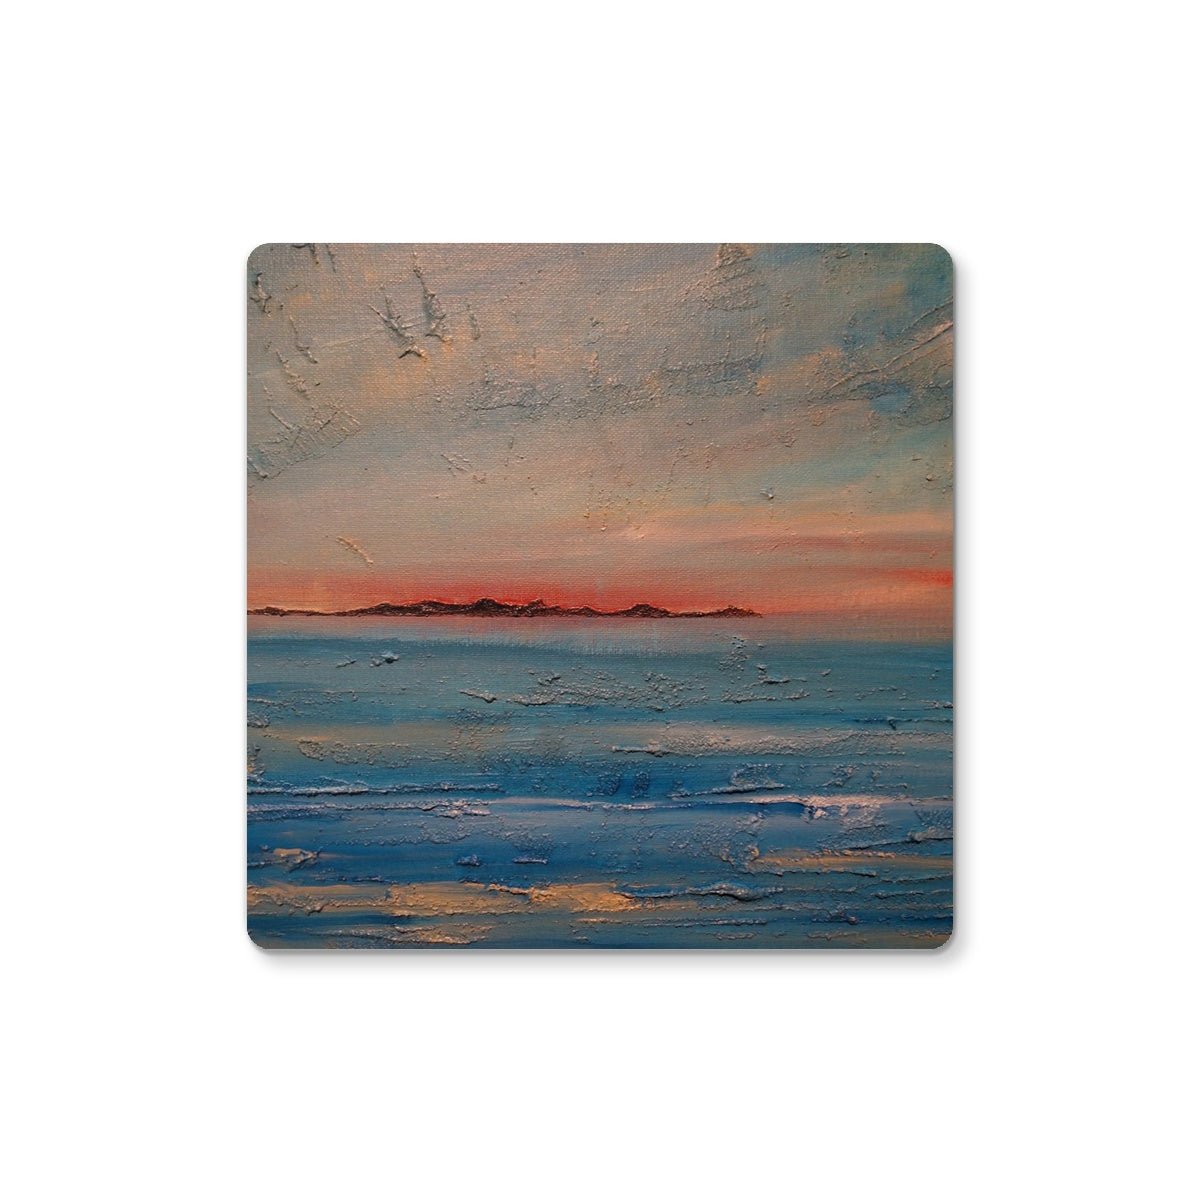 Gigha Sunset Art Gifts Coaster-Coasters-Hebridean Islands Art Gallery-6 Coasters-Paintings, Prints, Homeware, Art Gifts From Scotland By Scottish Artist Kevin Hunter